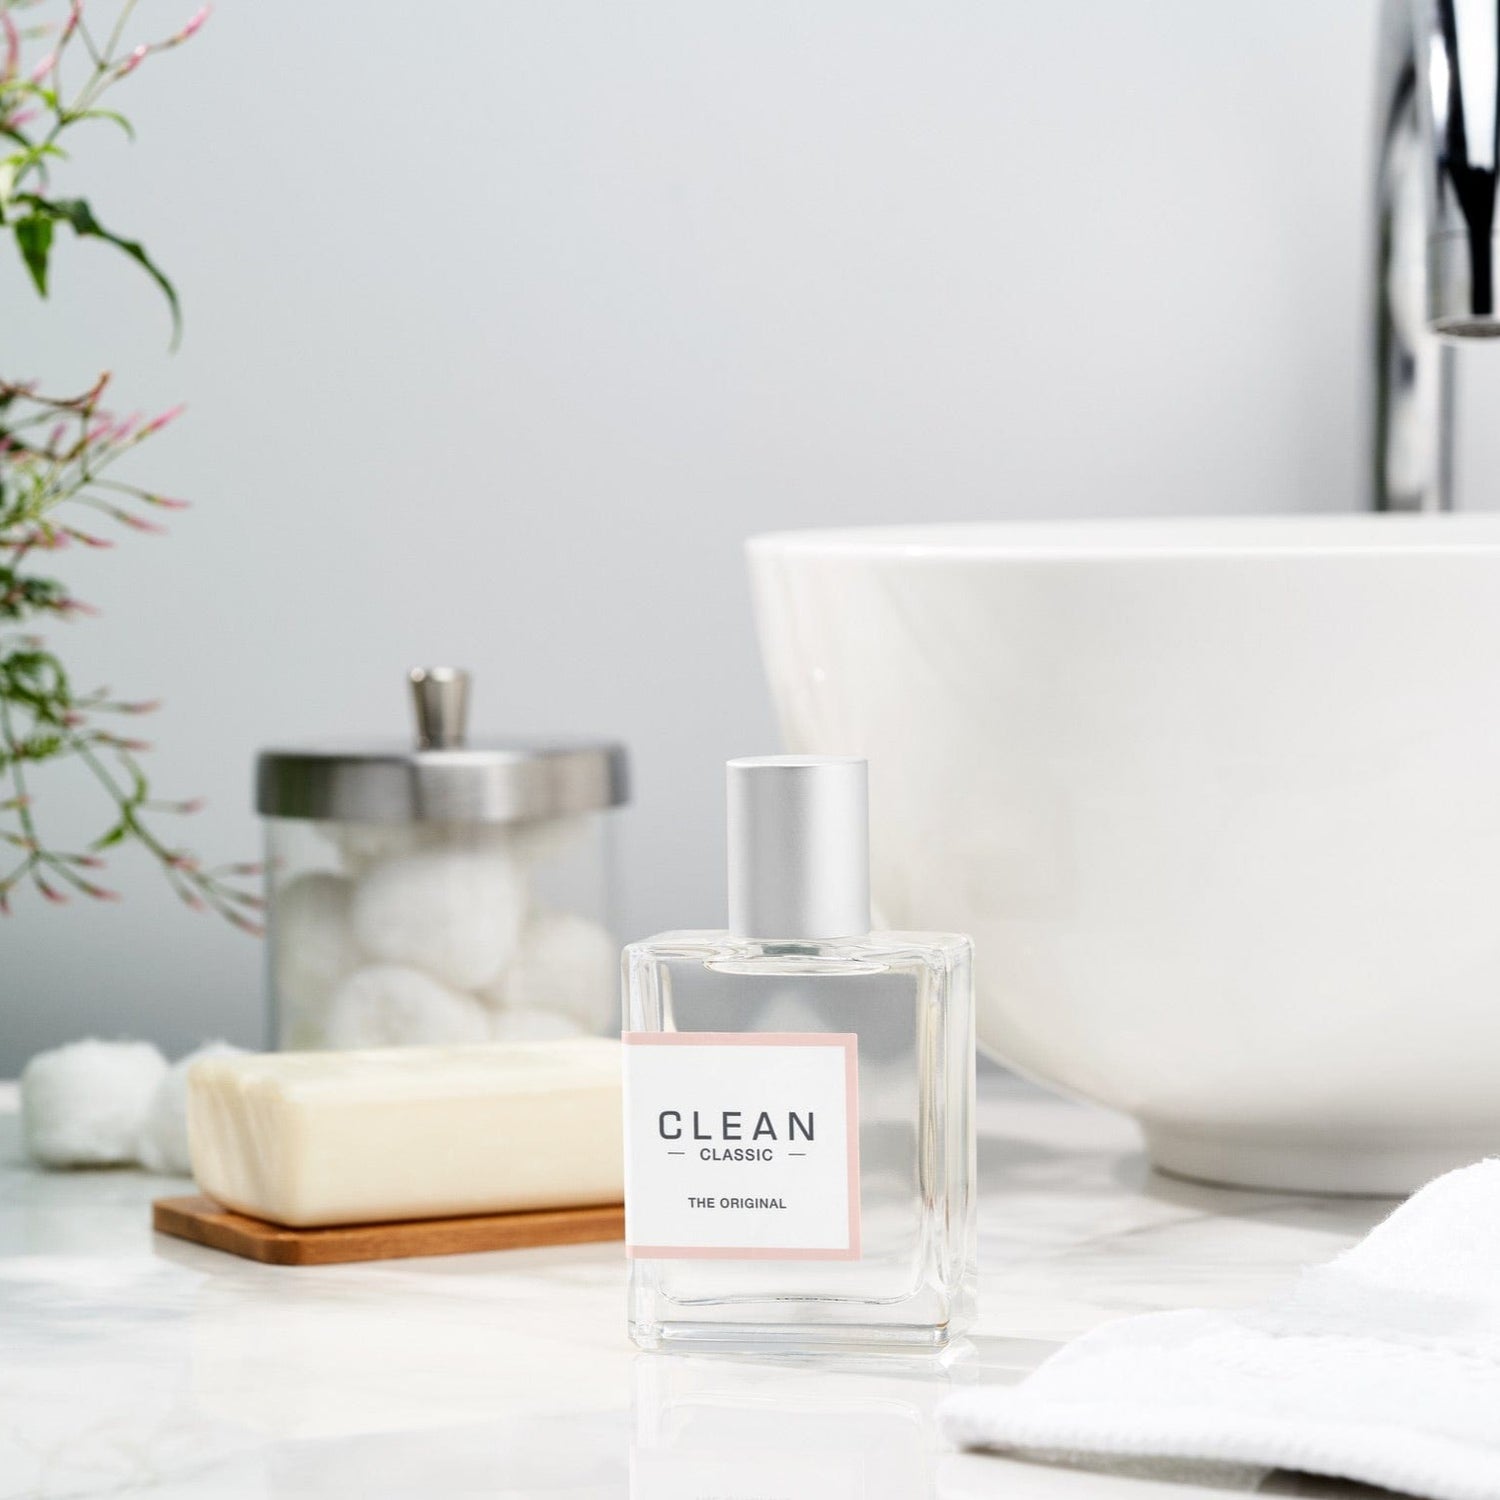 Clean Classic Pure Soap  Clean Perfume by Clean Beauty Collective